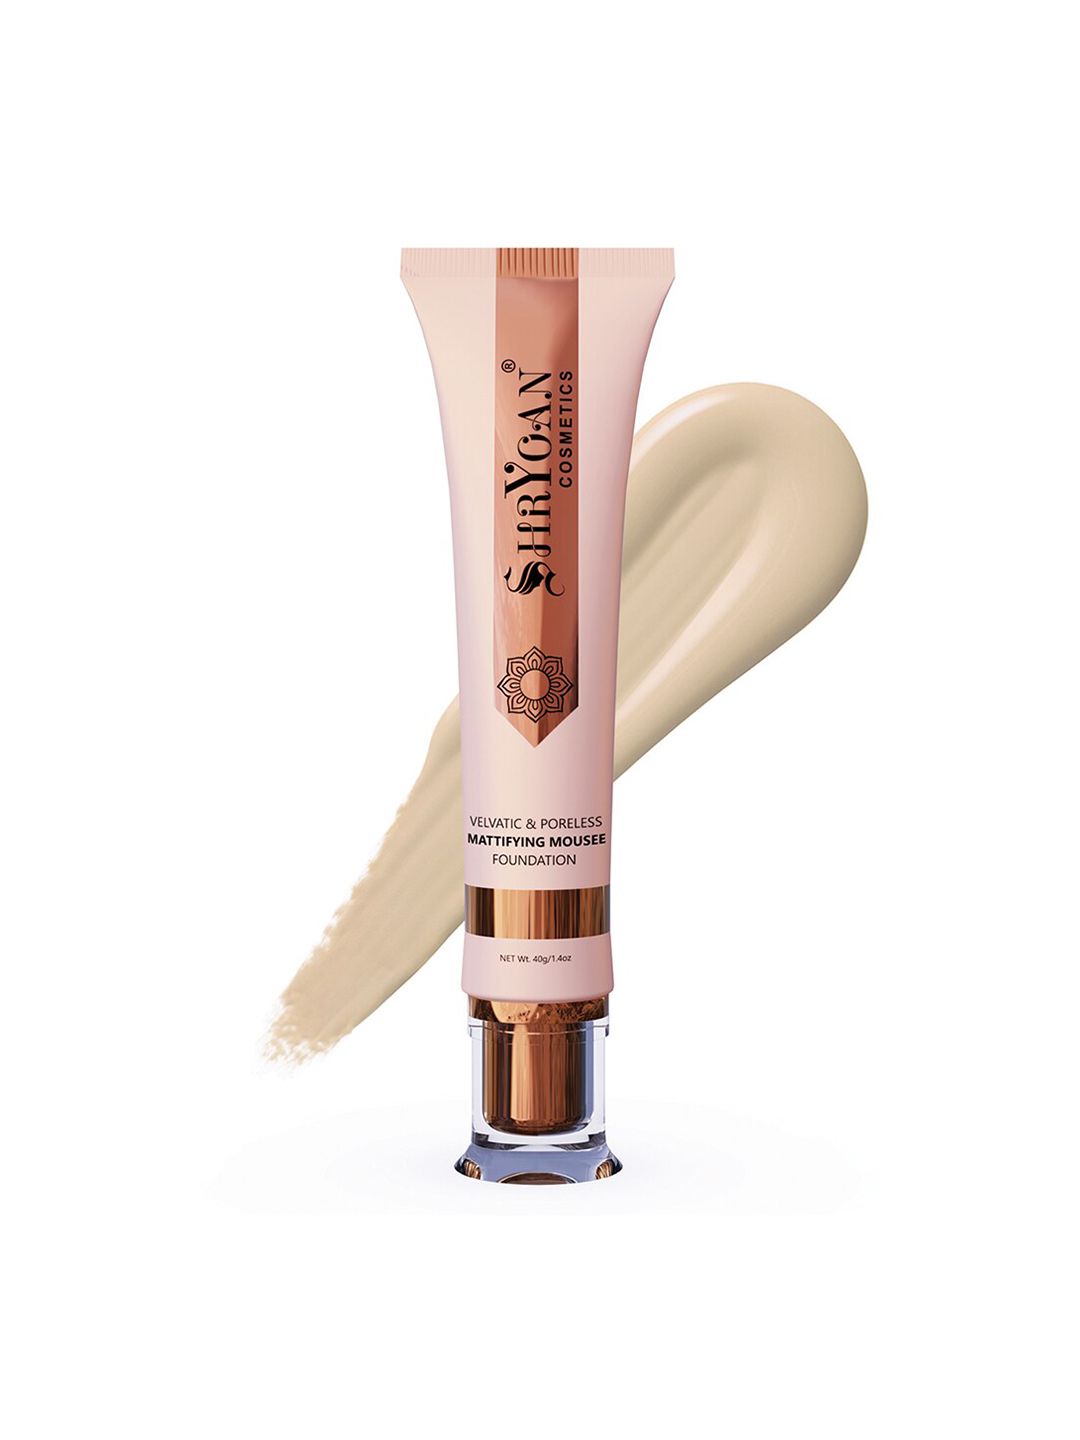 SHRYOAN Women Mattifying Mousee Foundation 40g Price in India